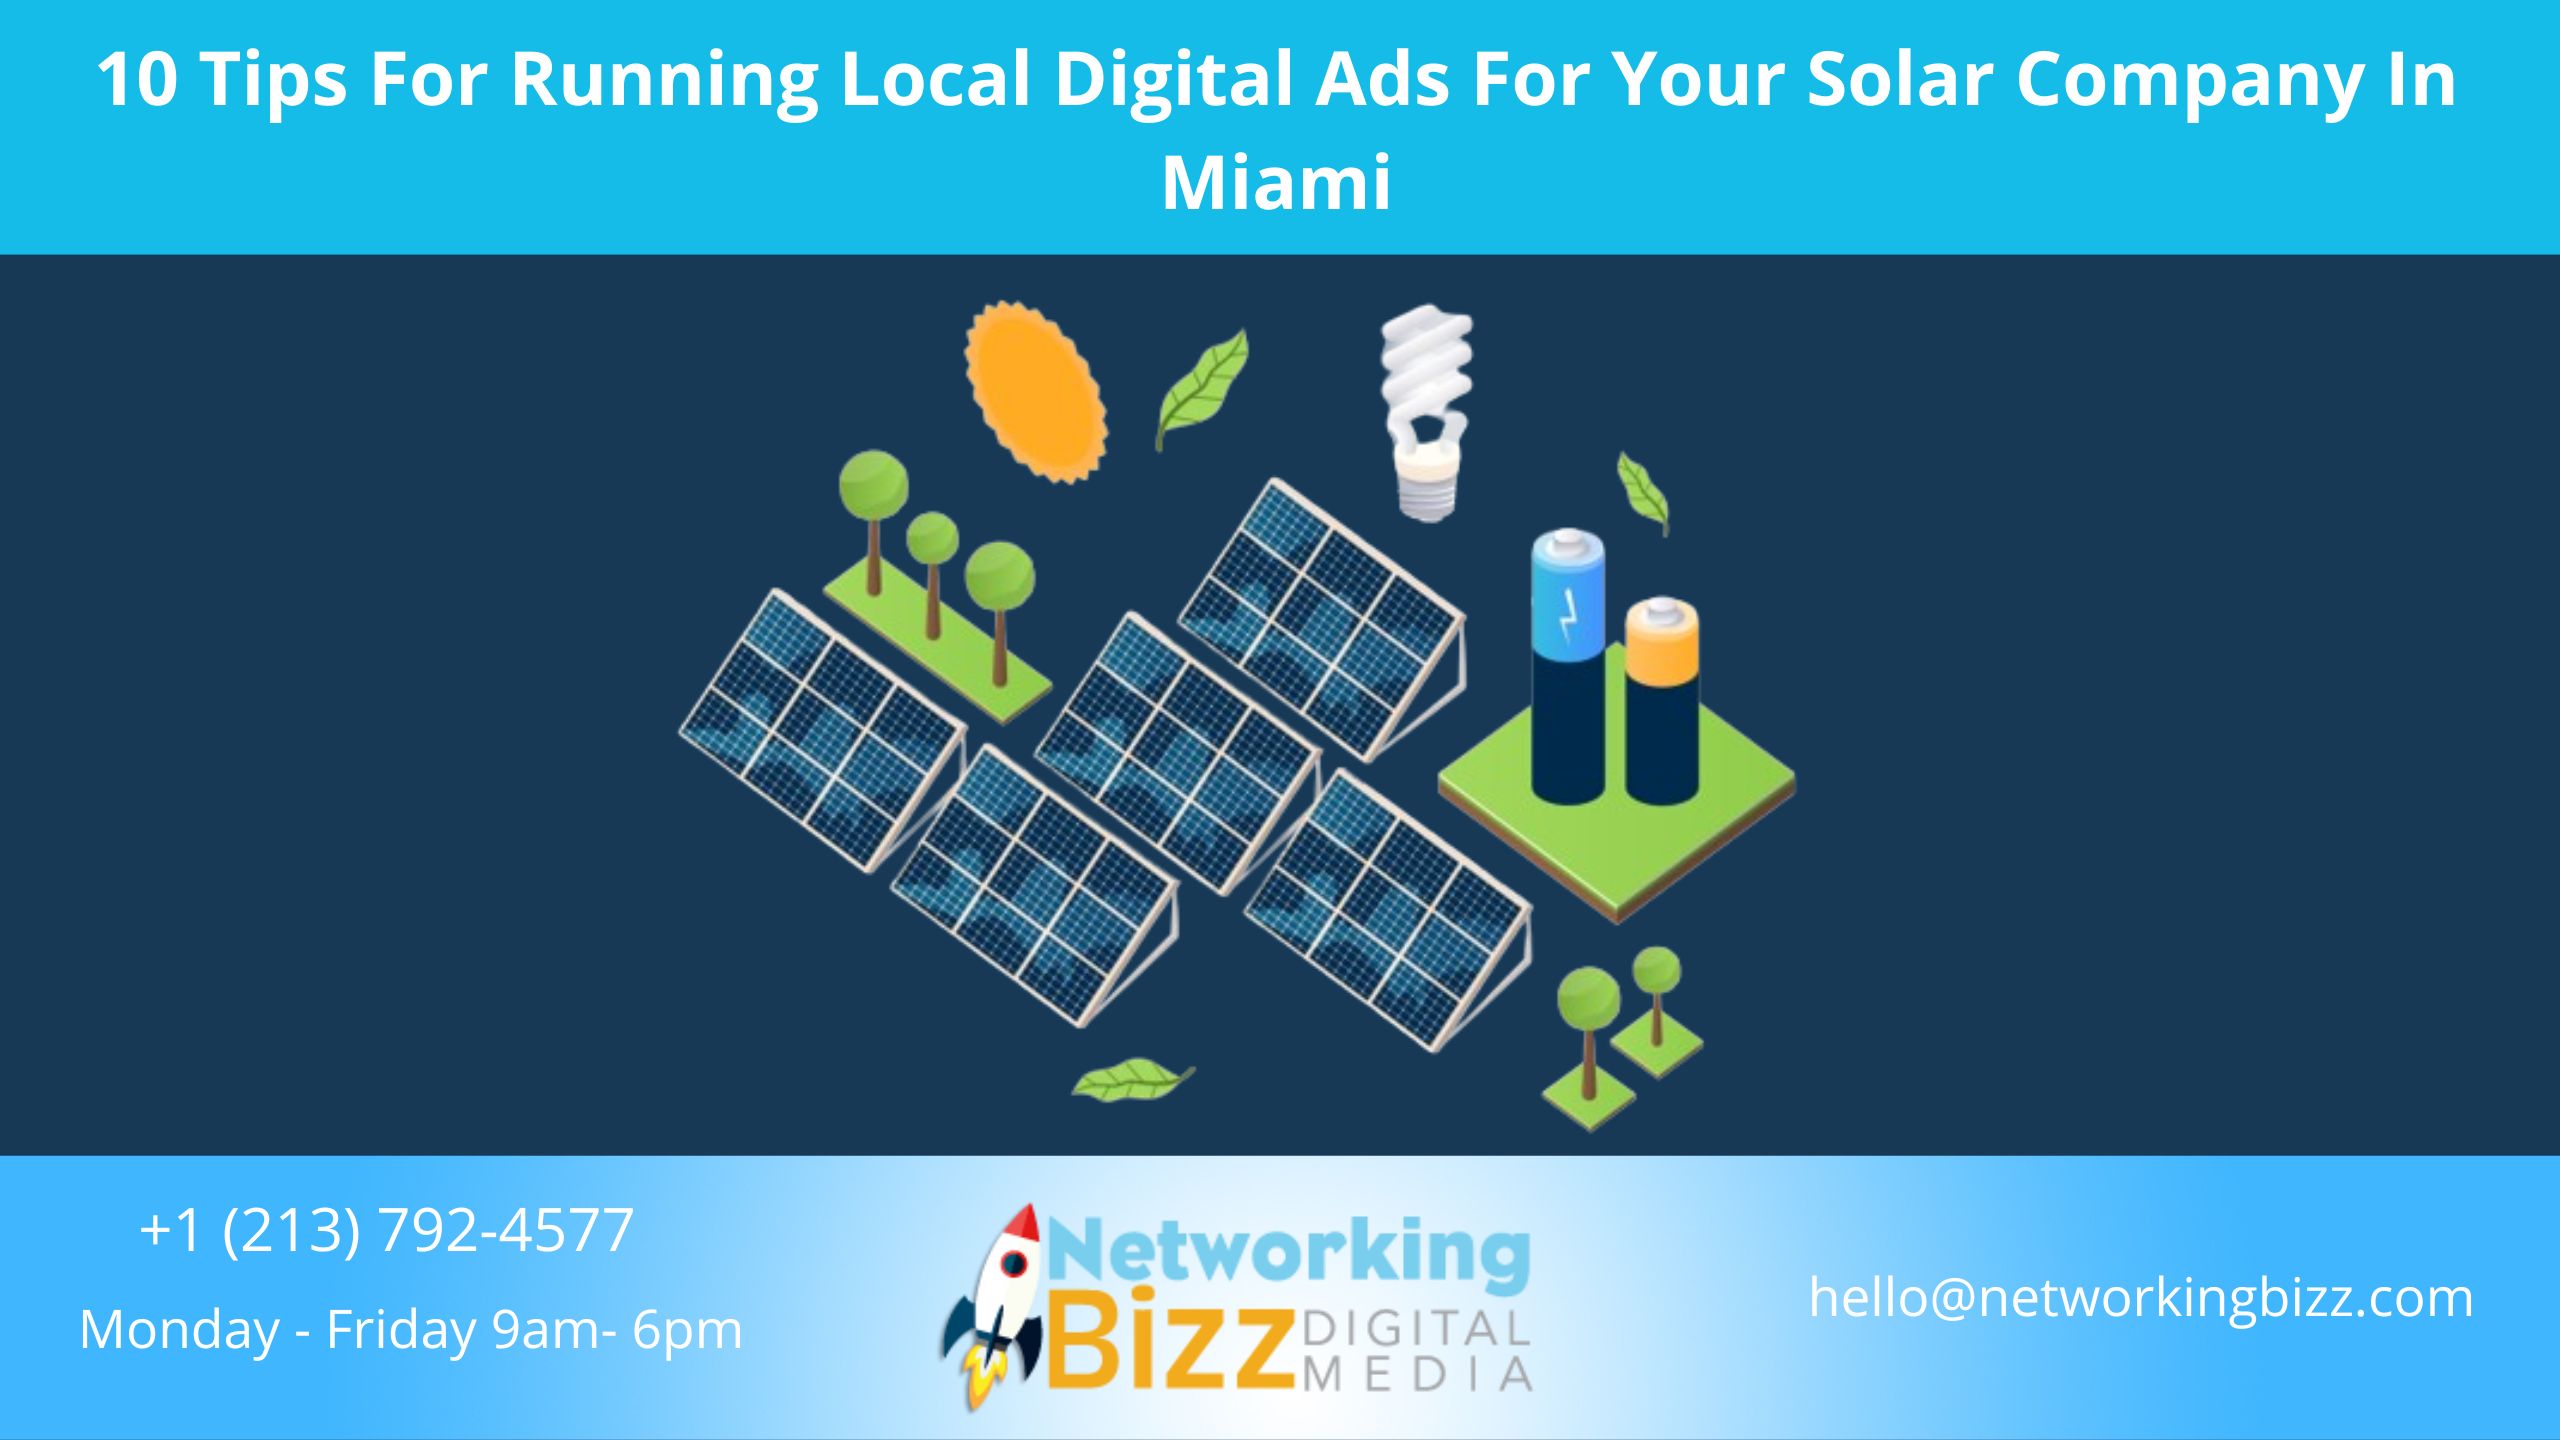 10 Tips For Running Local Digital Ads For Your Solar Company In Miami